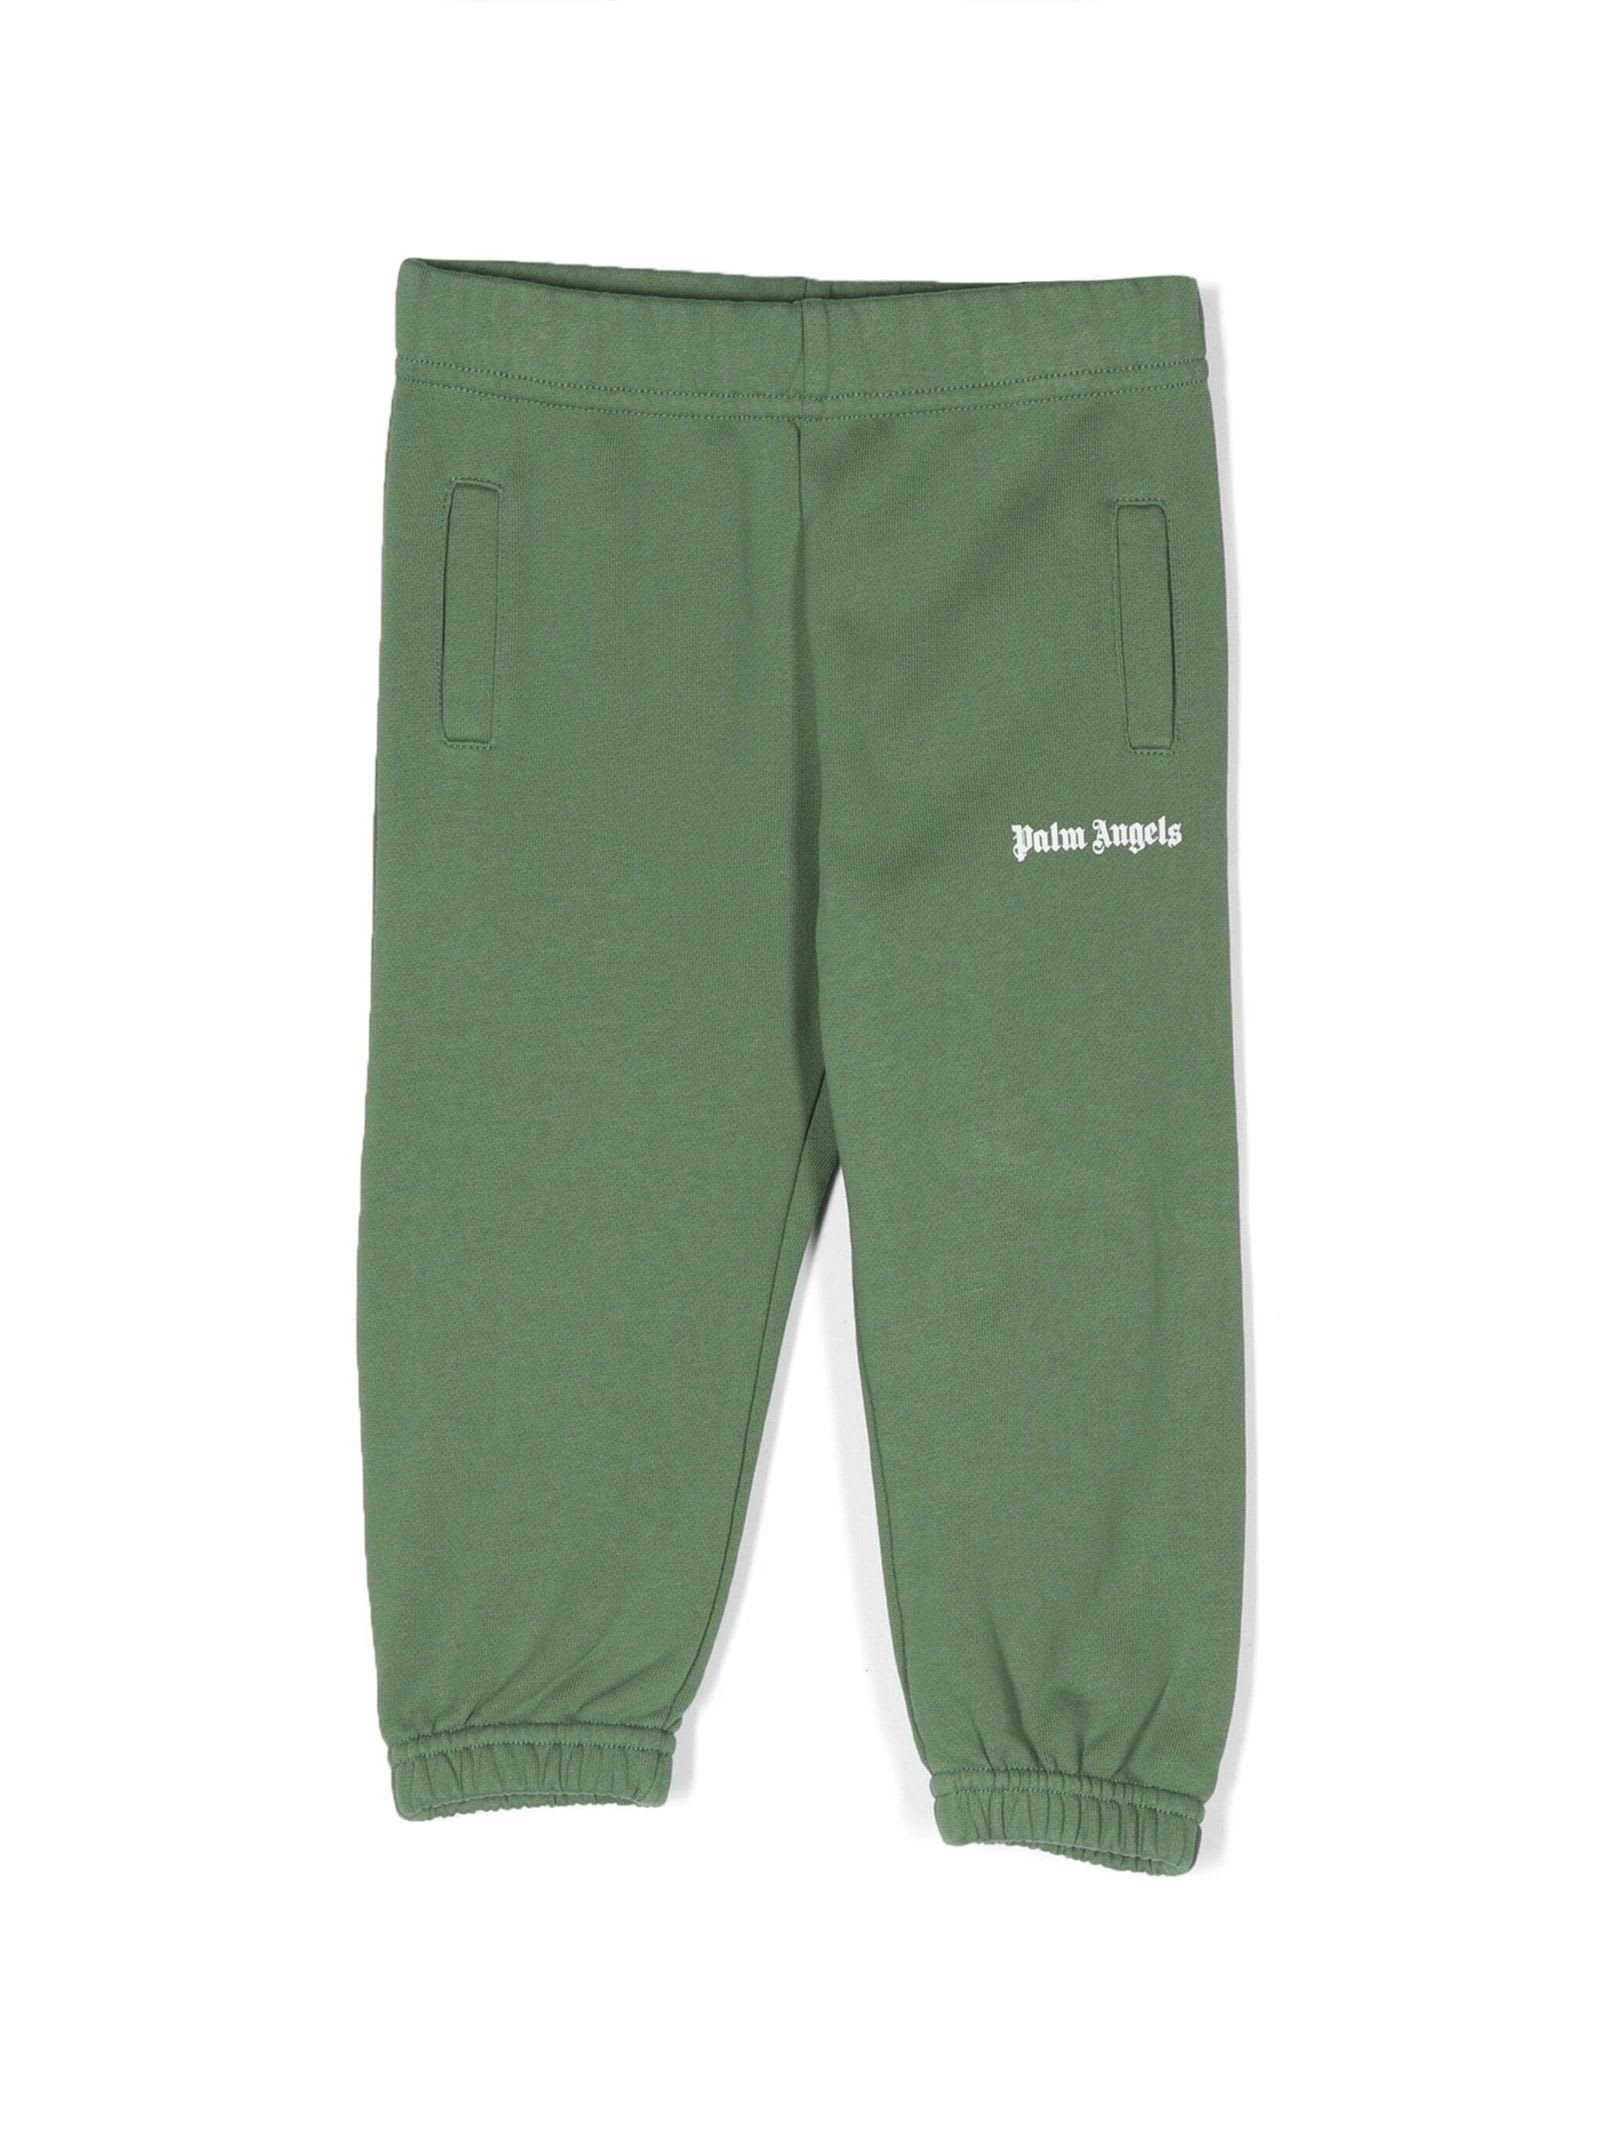 PALM ANGELS GREEN COTTON TROUSERS